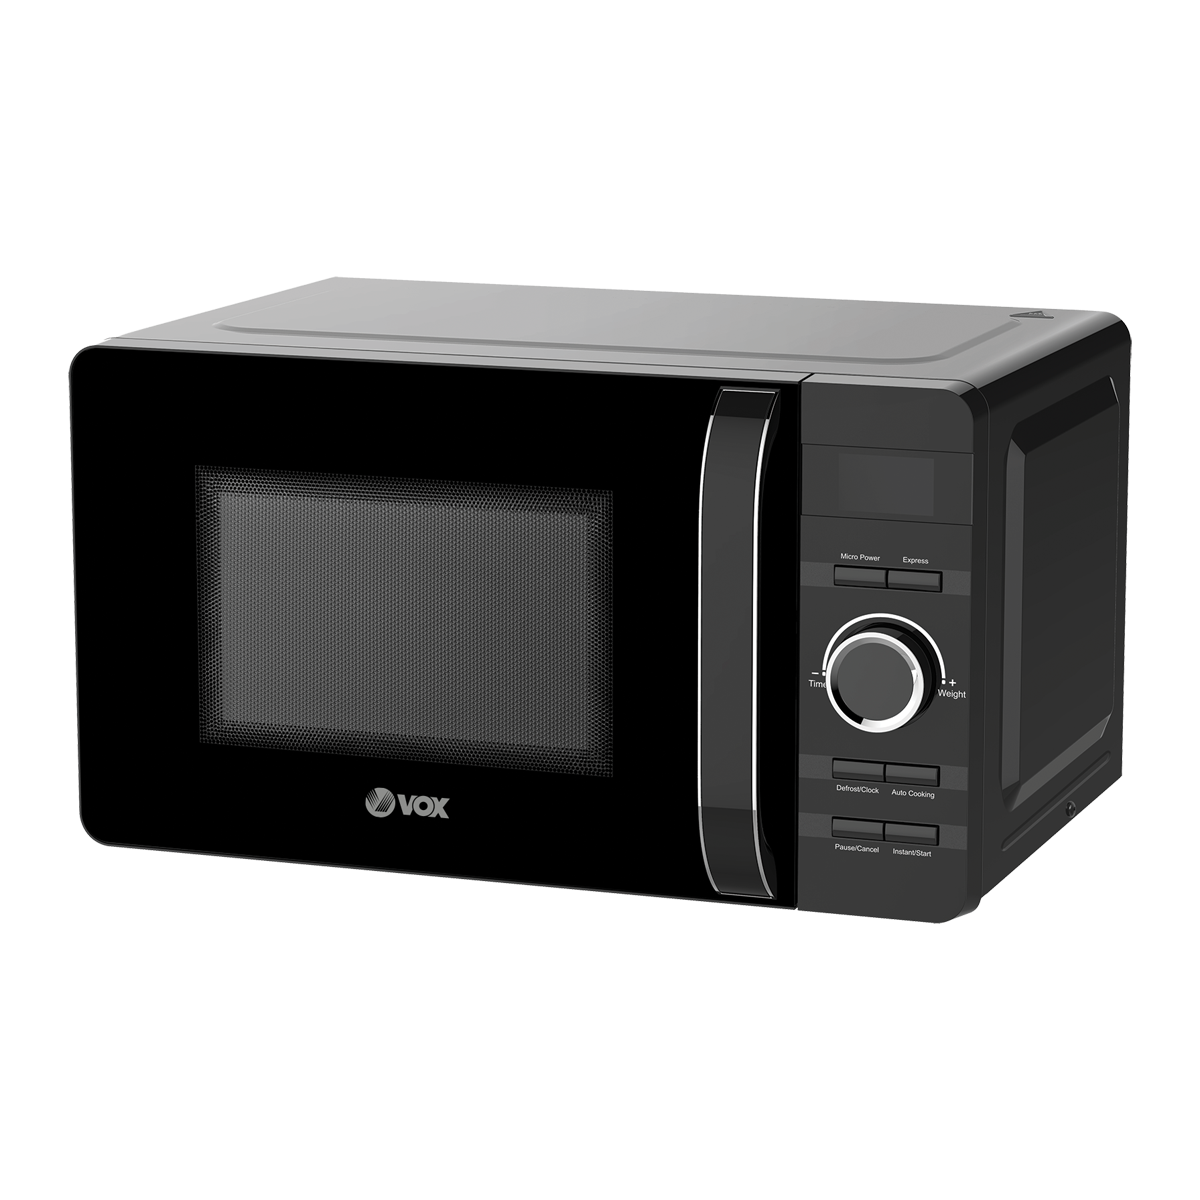 Microwave oven MWH-MD30B MD30B | VOX Electronics